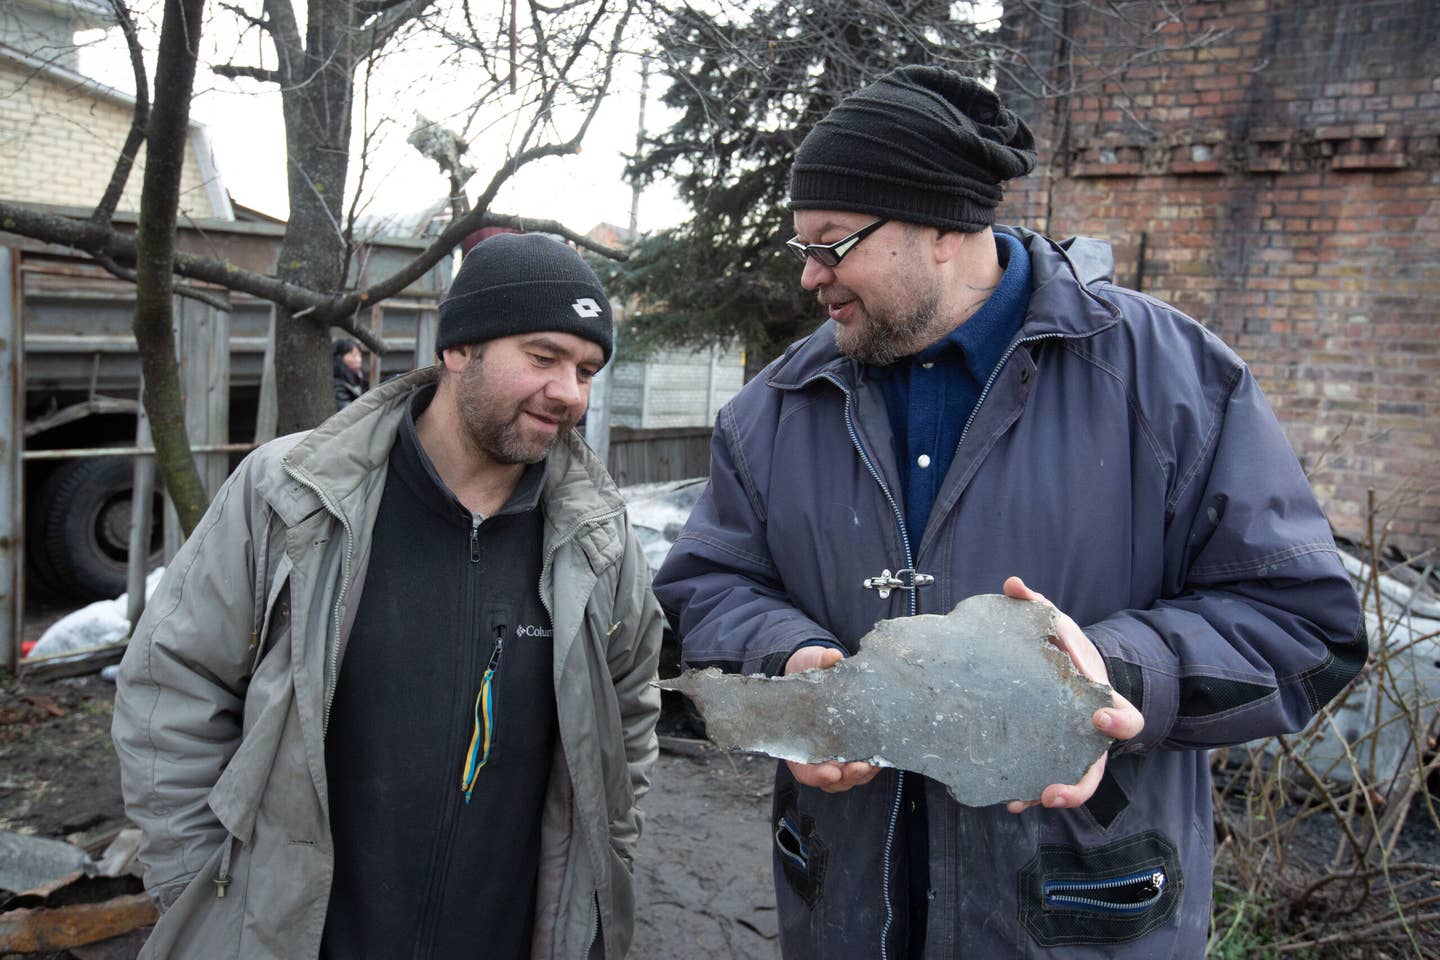 Men look at a piece of a cruise missile that destroyed their neighbor’s house in a village outside Kyiv, Ukraine. Russia launched a massive missile attack on Ukraine on December 29, 2022. <em>Photo by Oleksii Chumachenko/Anadolu Agency via Getty Images</em>